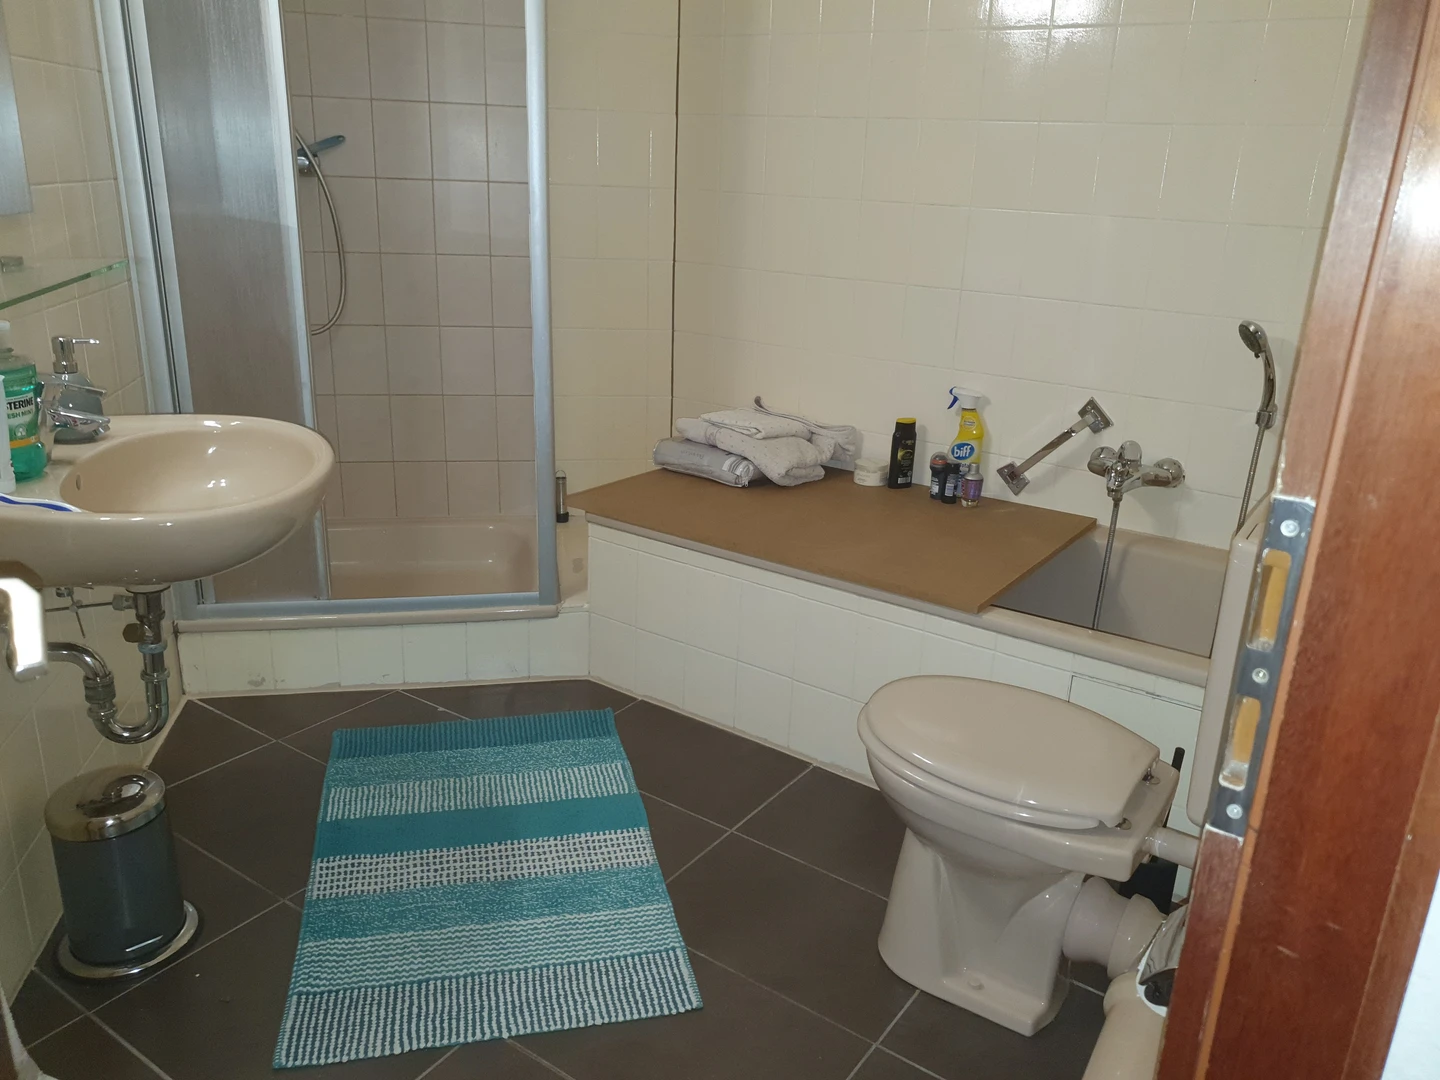 Room for rent in a shared flat in Nuremberg